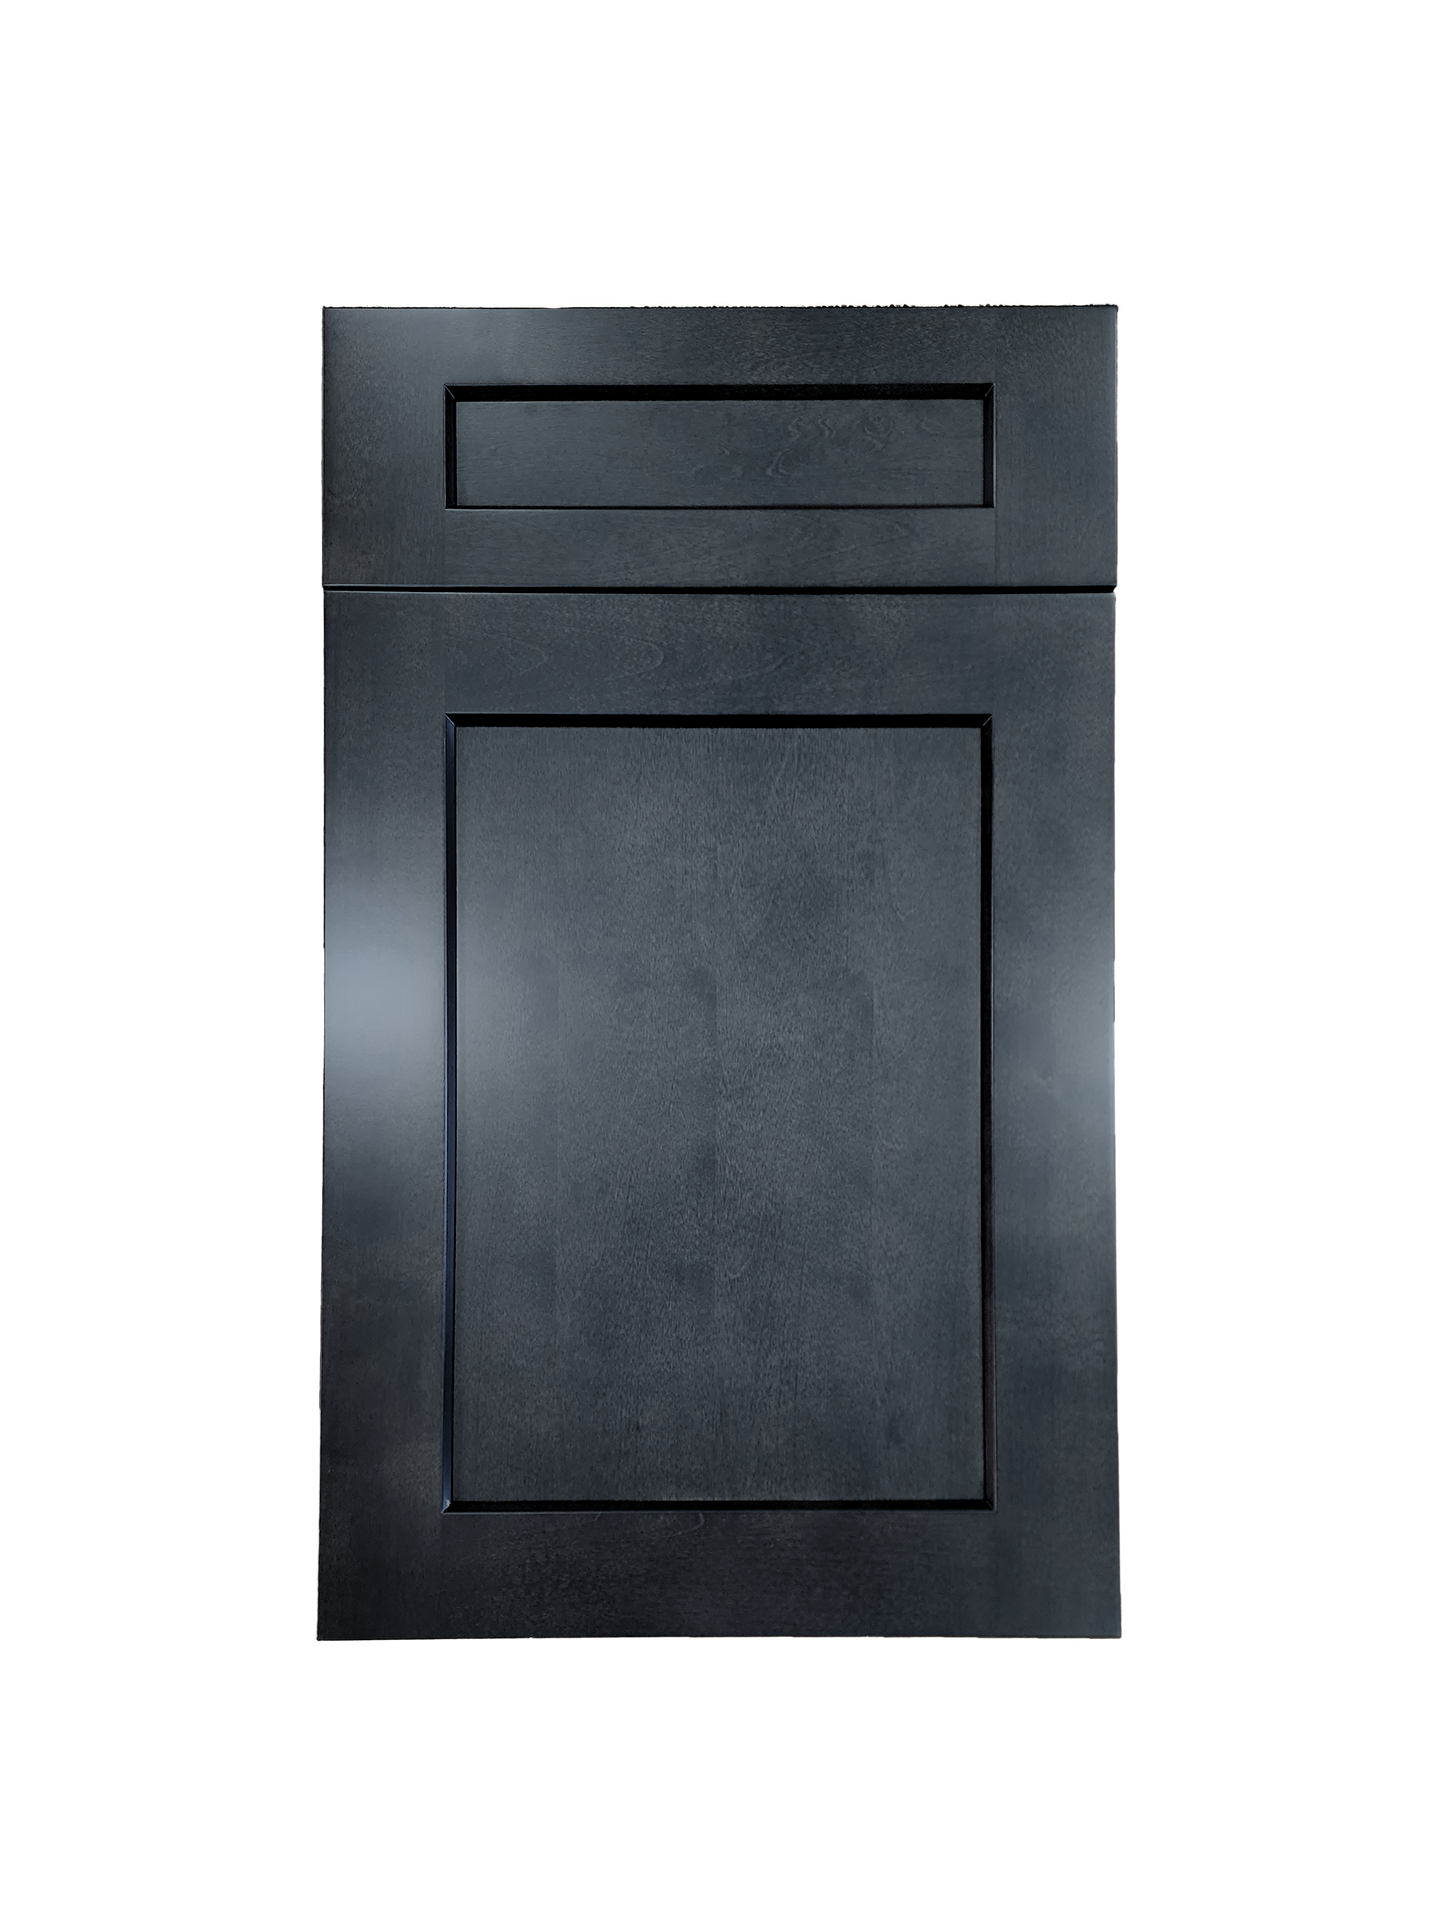 Stormy Grey Wall Cabinet 24 inches wide 12 inches deep 15 inches tall with Stormy Grey box and Stormy Grey doors